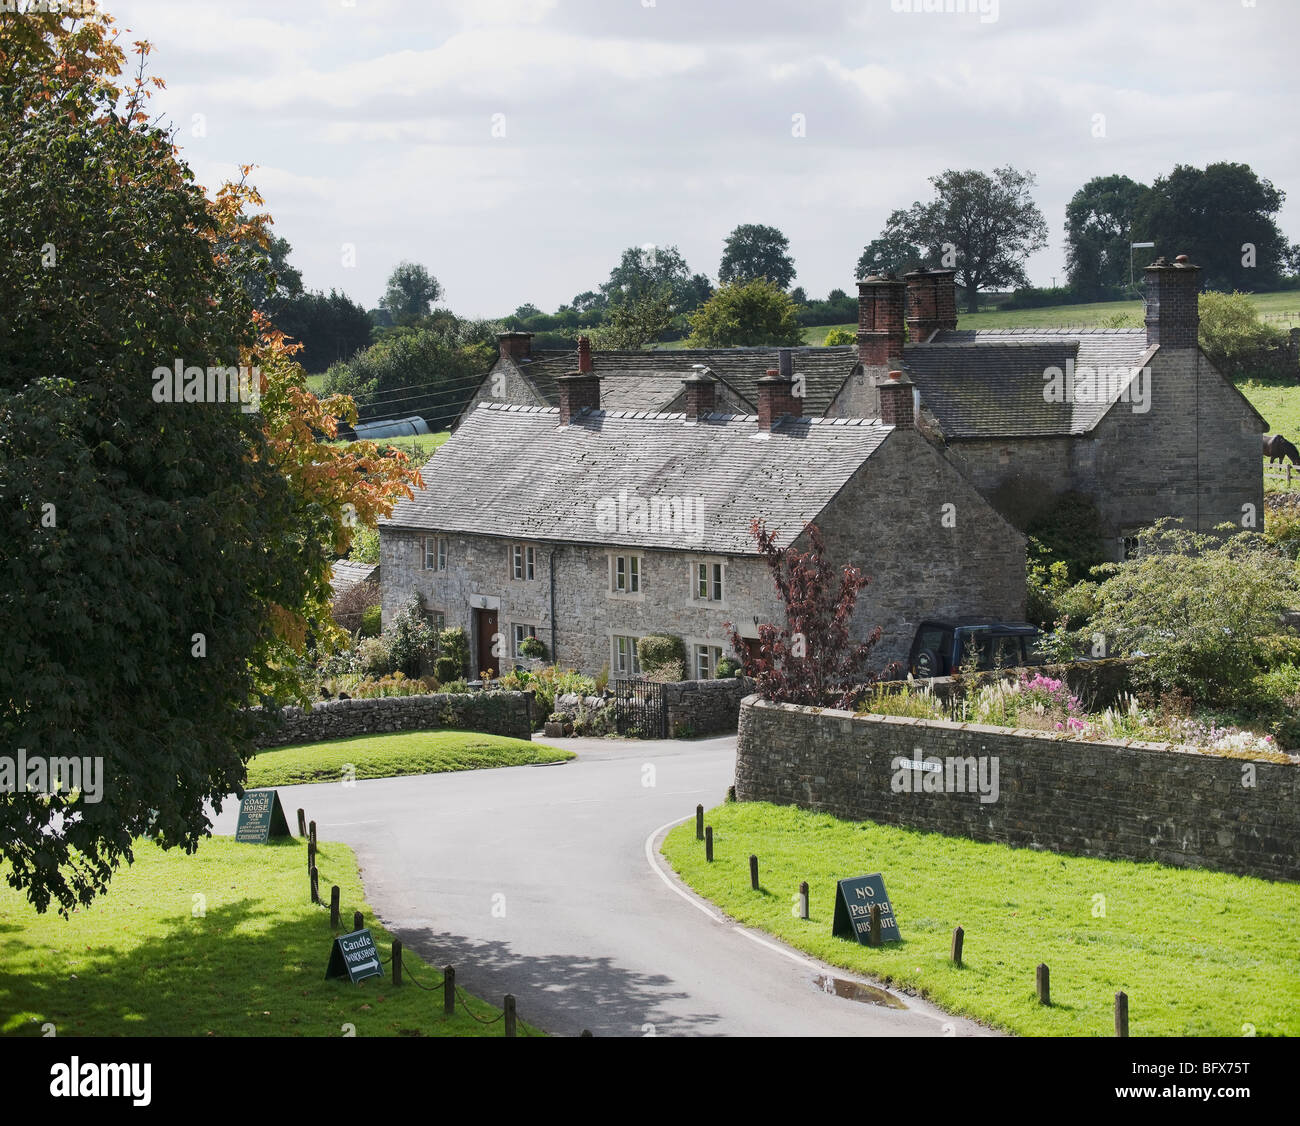 village with houses in countryside - tissington, derbyshire, peak district, national park, england, uk Stock Photo